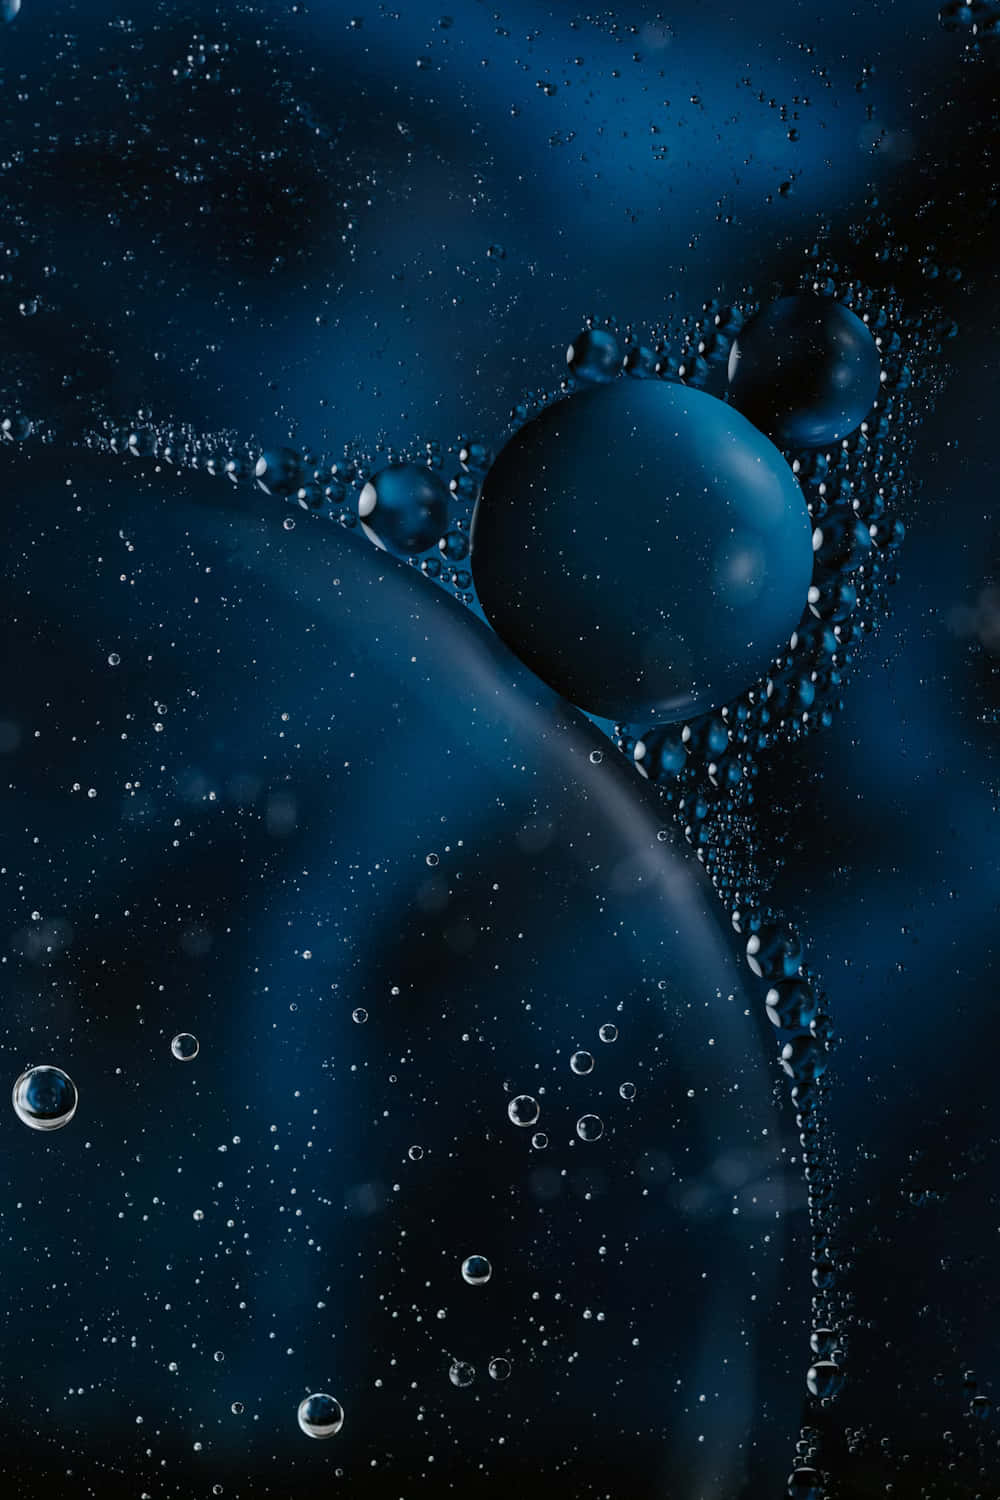 Abstract Blue Oiland Water Droplets Wallpaper